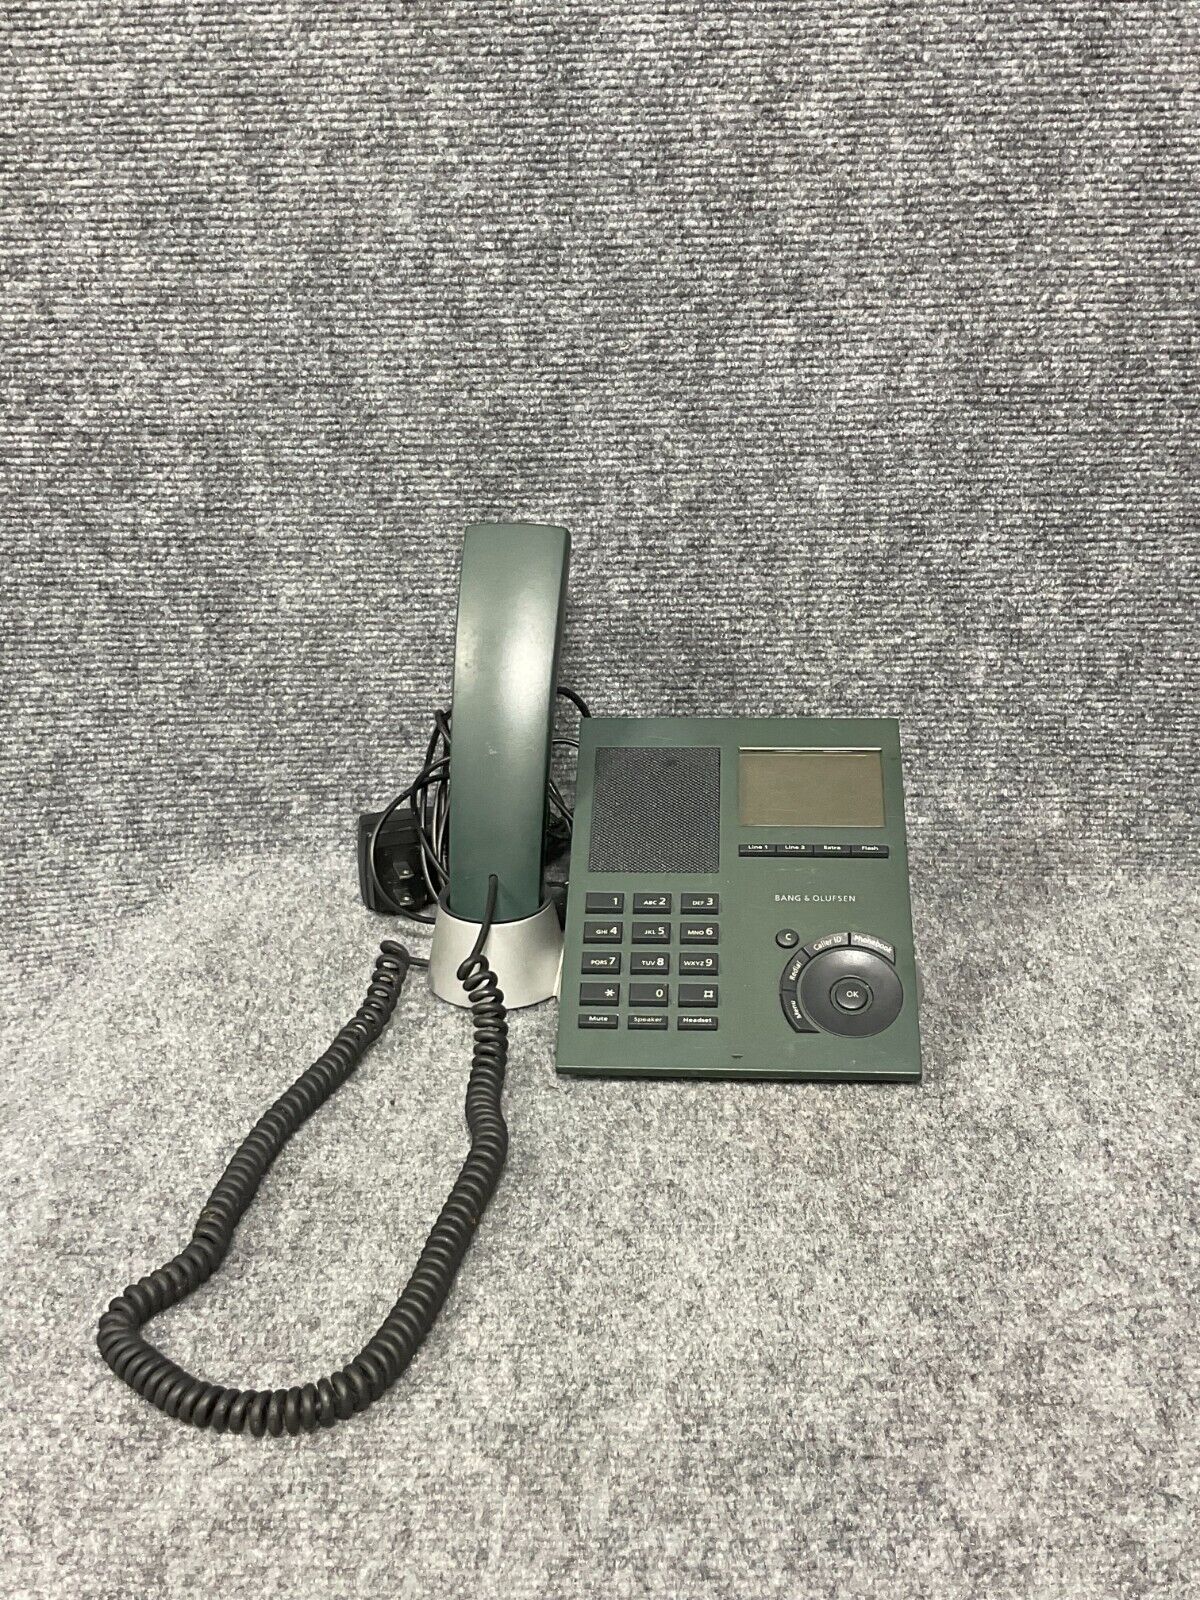 Bang & Olufsen B&O BeoCom 3 Telephone 2-Line With Cords